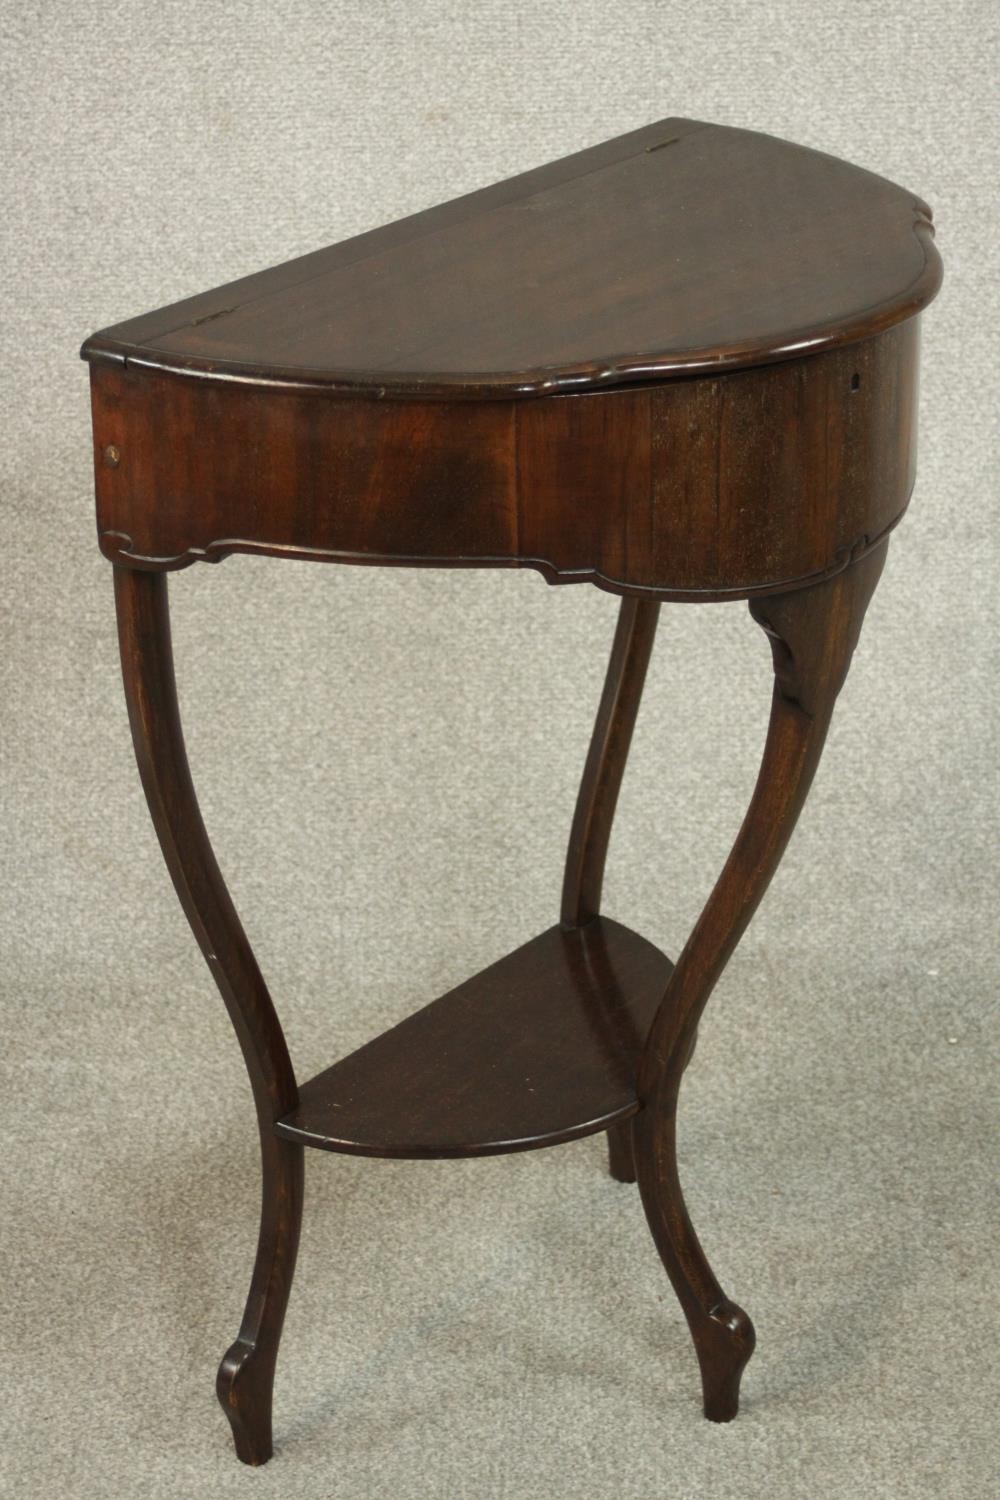 An early 20th century mahogany demi lune side table, with a foldover top opening to reveal a - Image 4 of 7